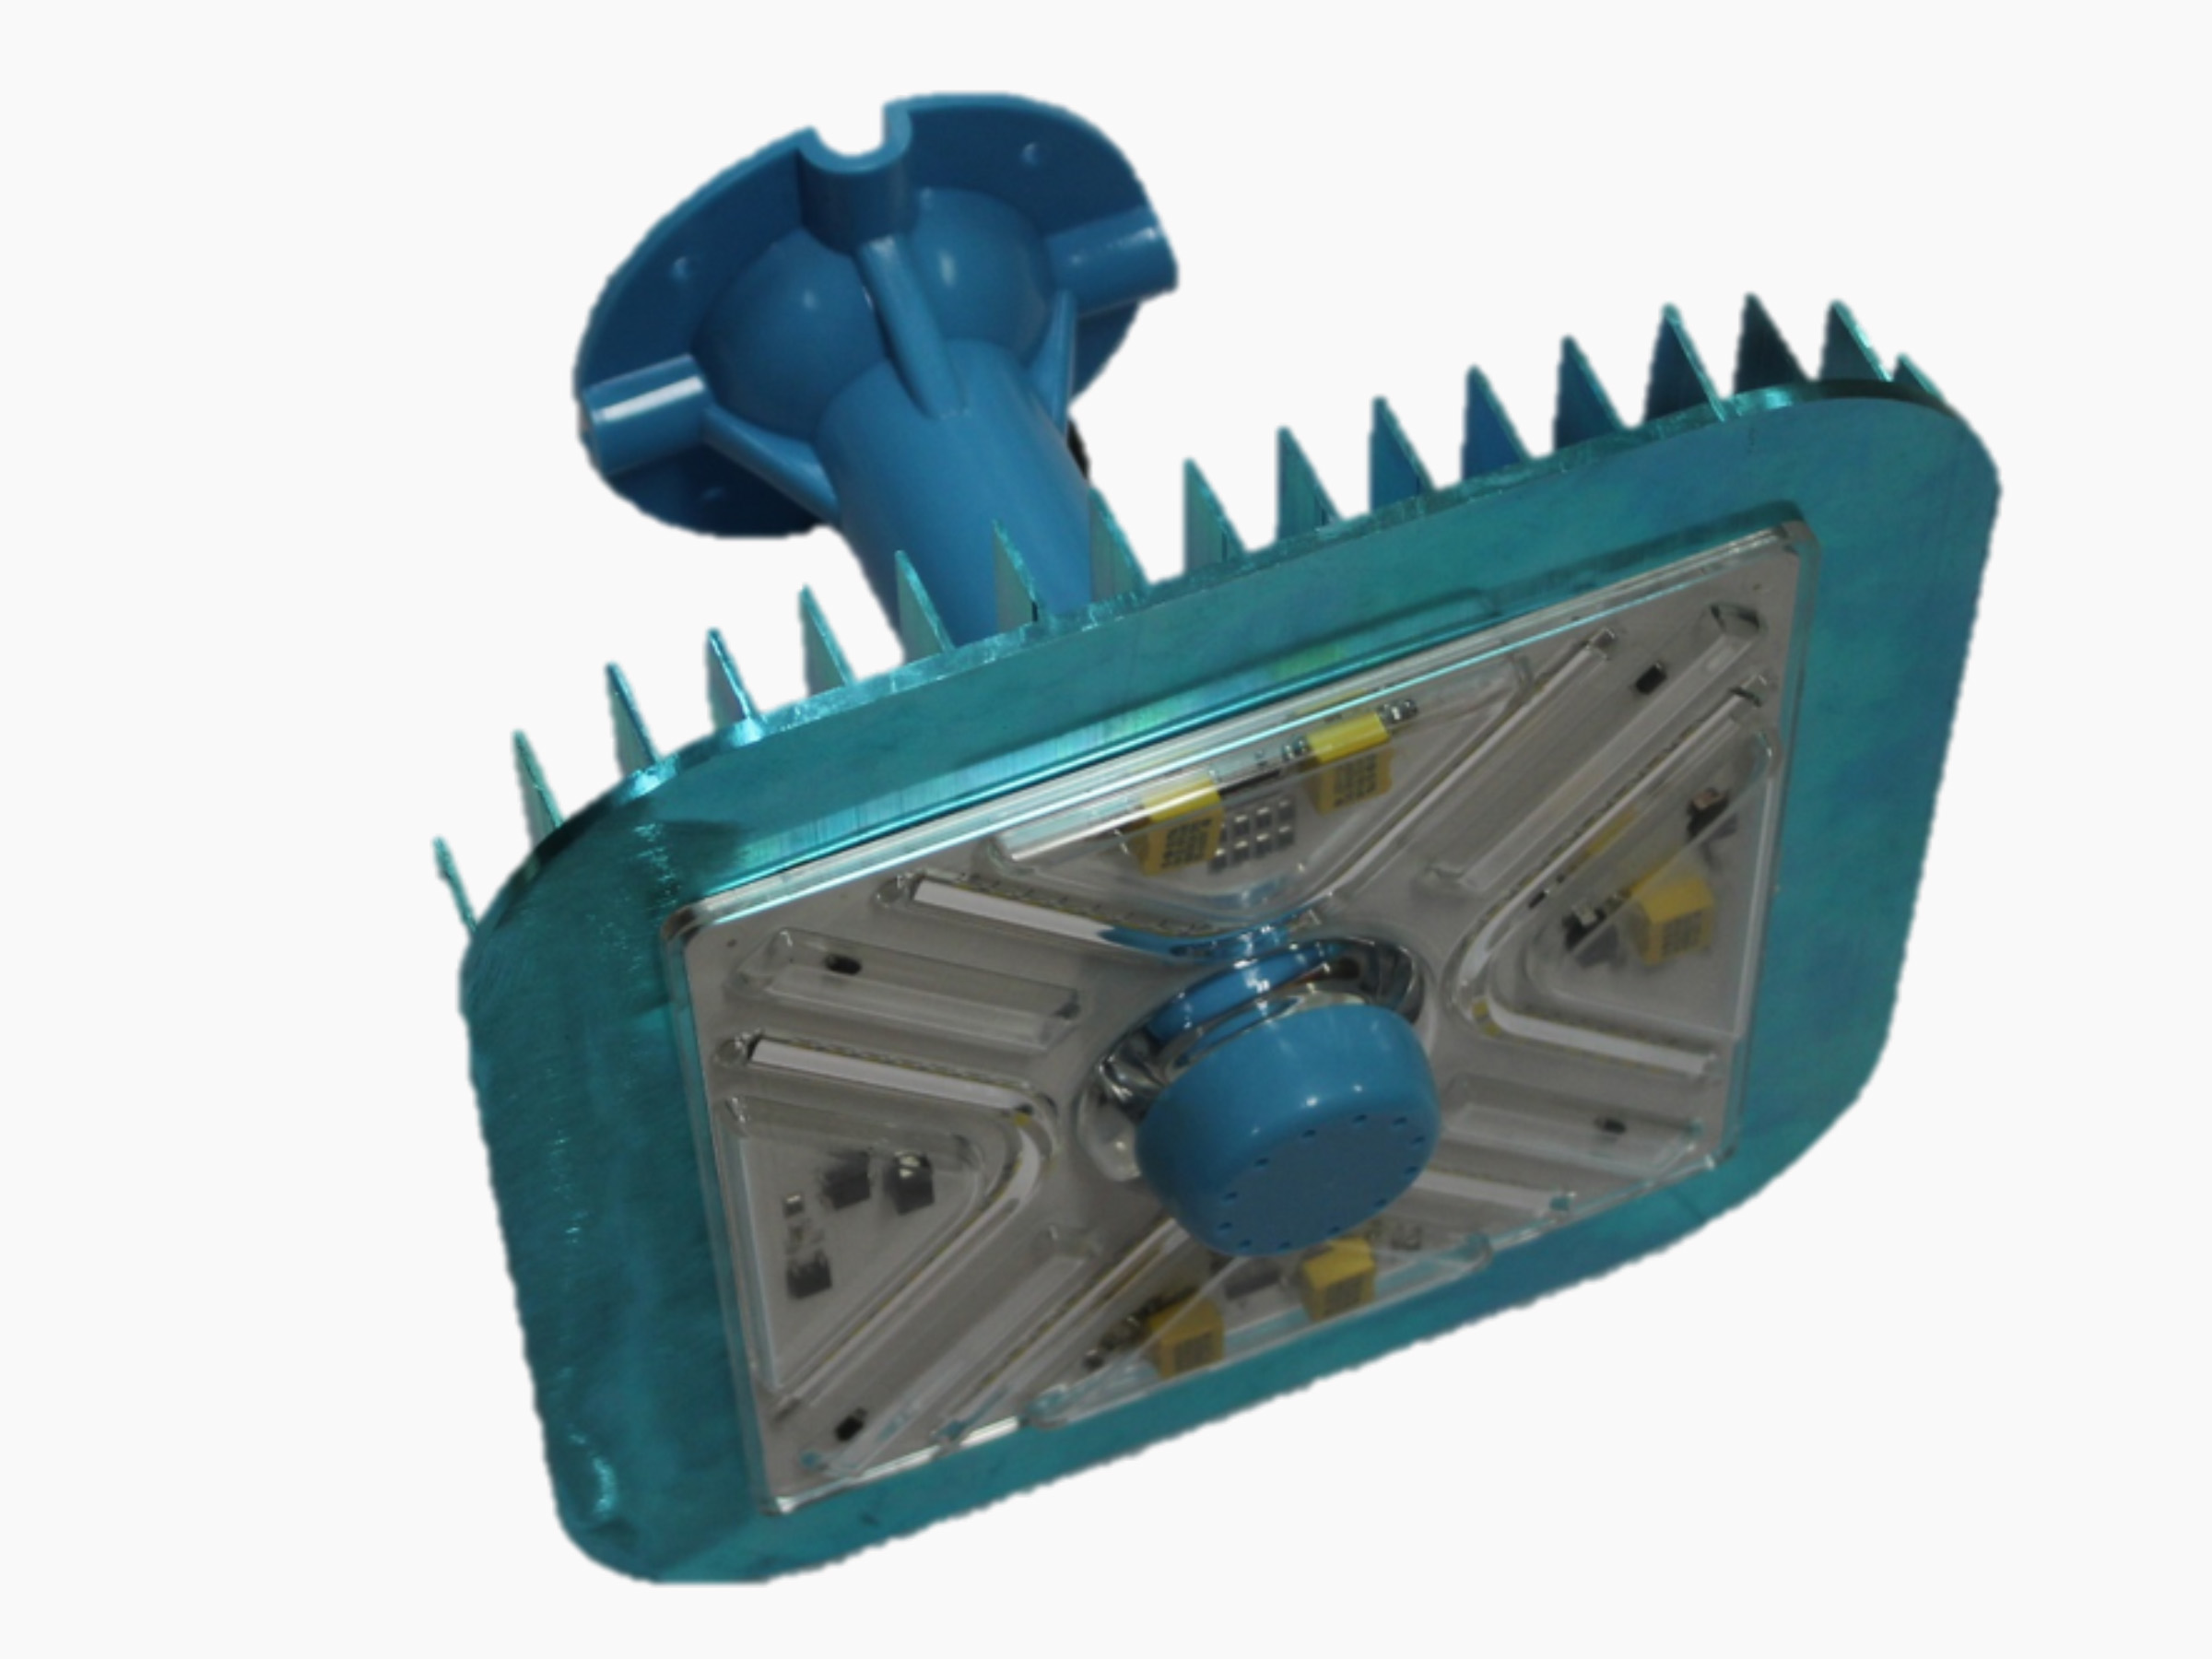 LED high bay light with No Ballast